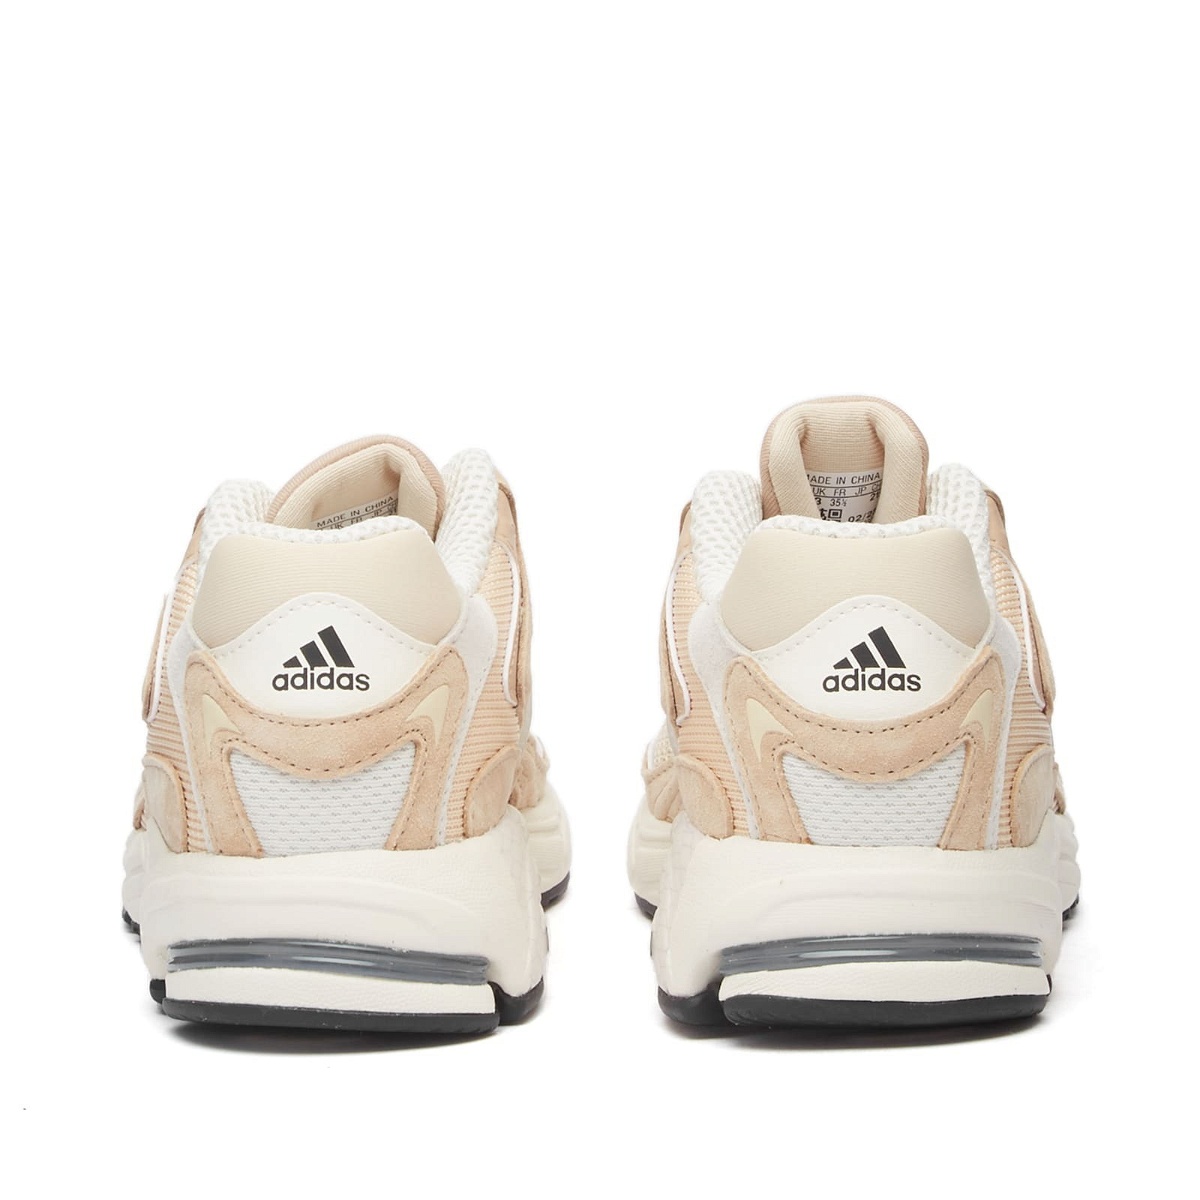 Adidas Response CL in White/Beige Sand/Off Sneakers adidas